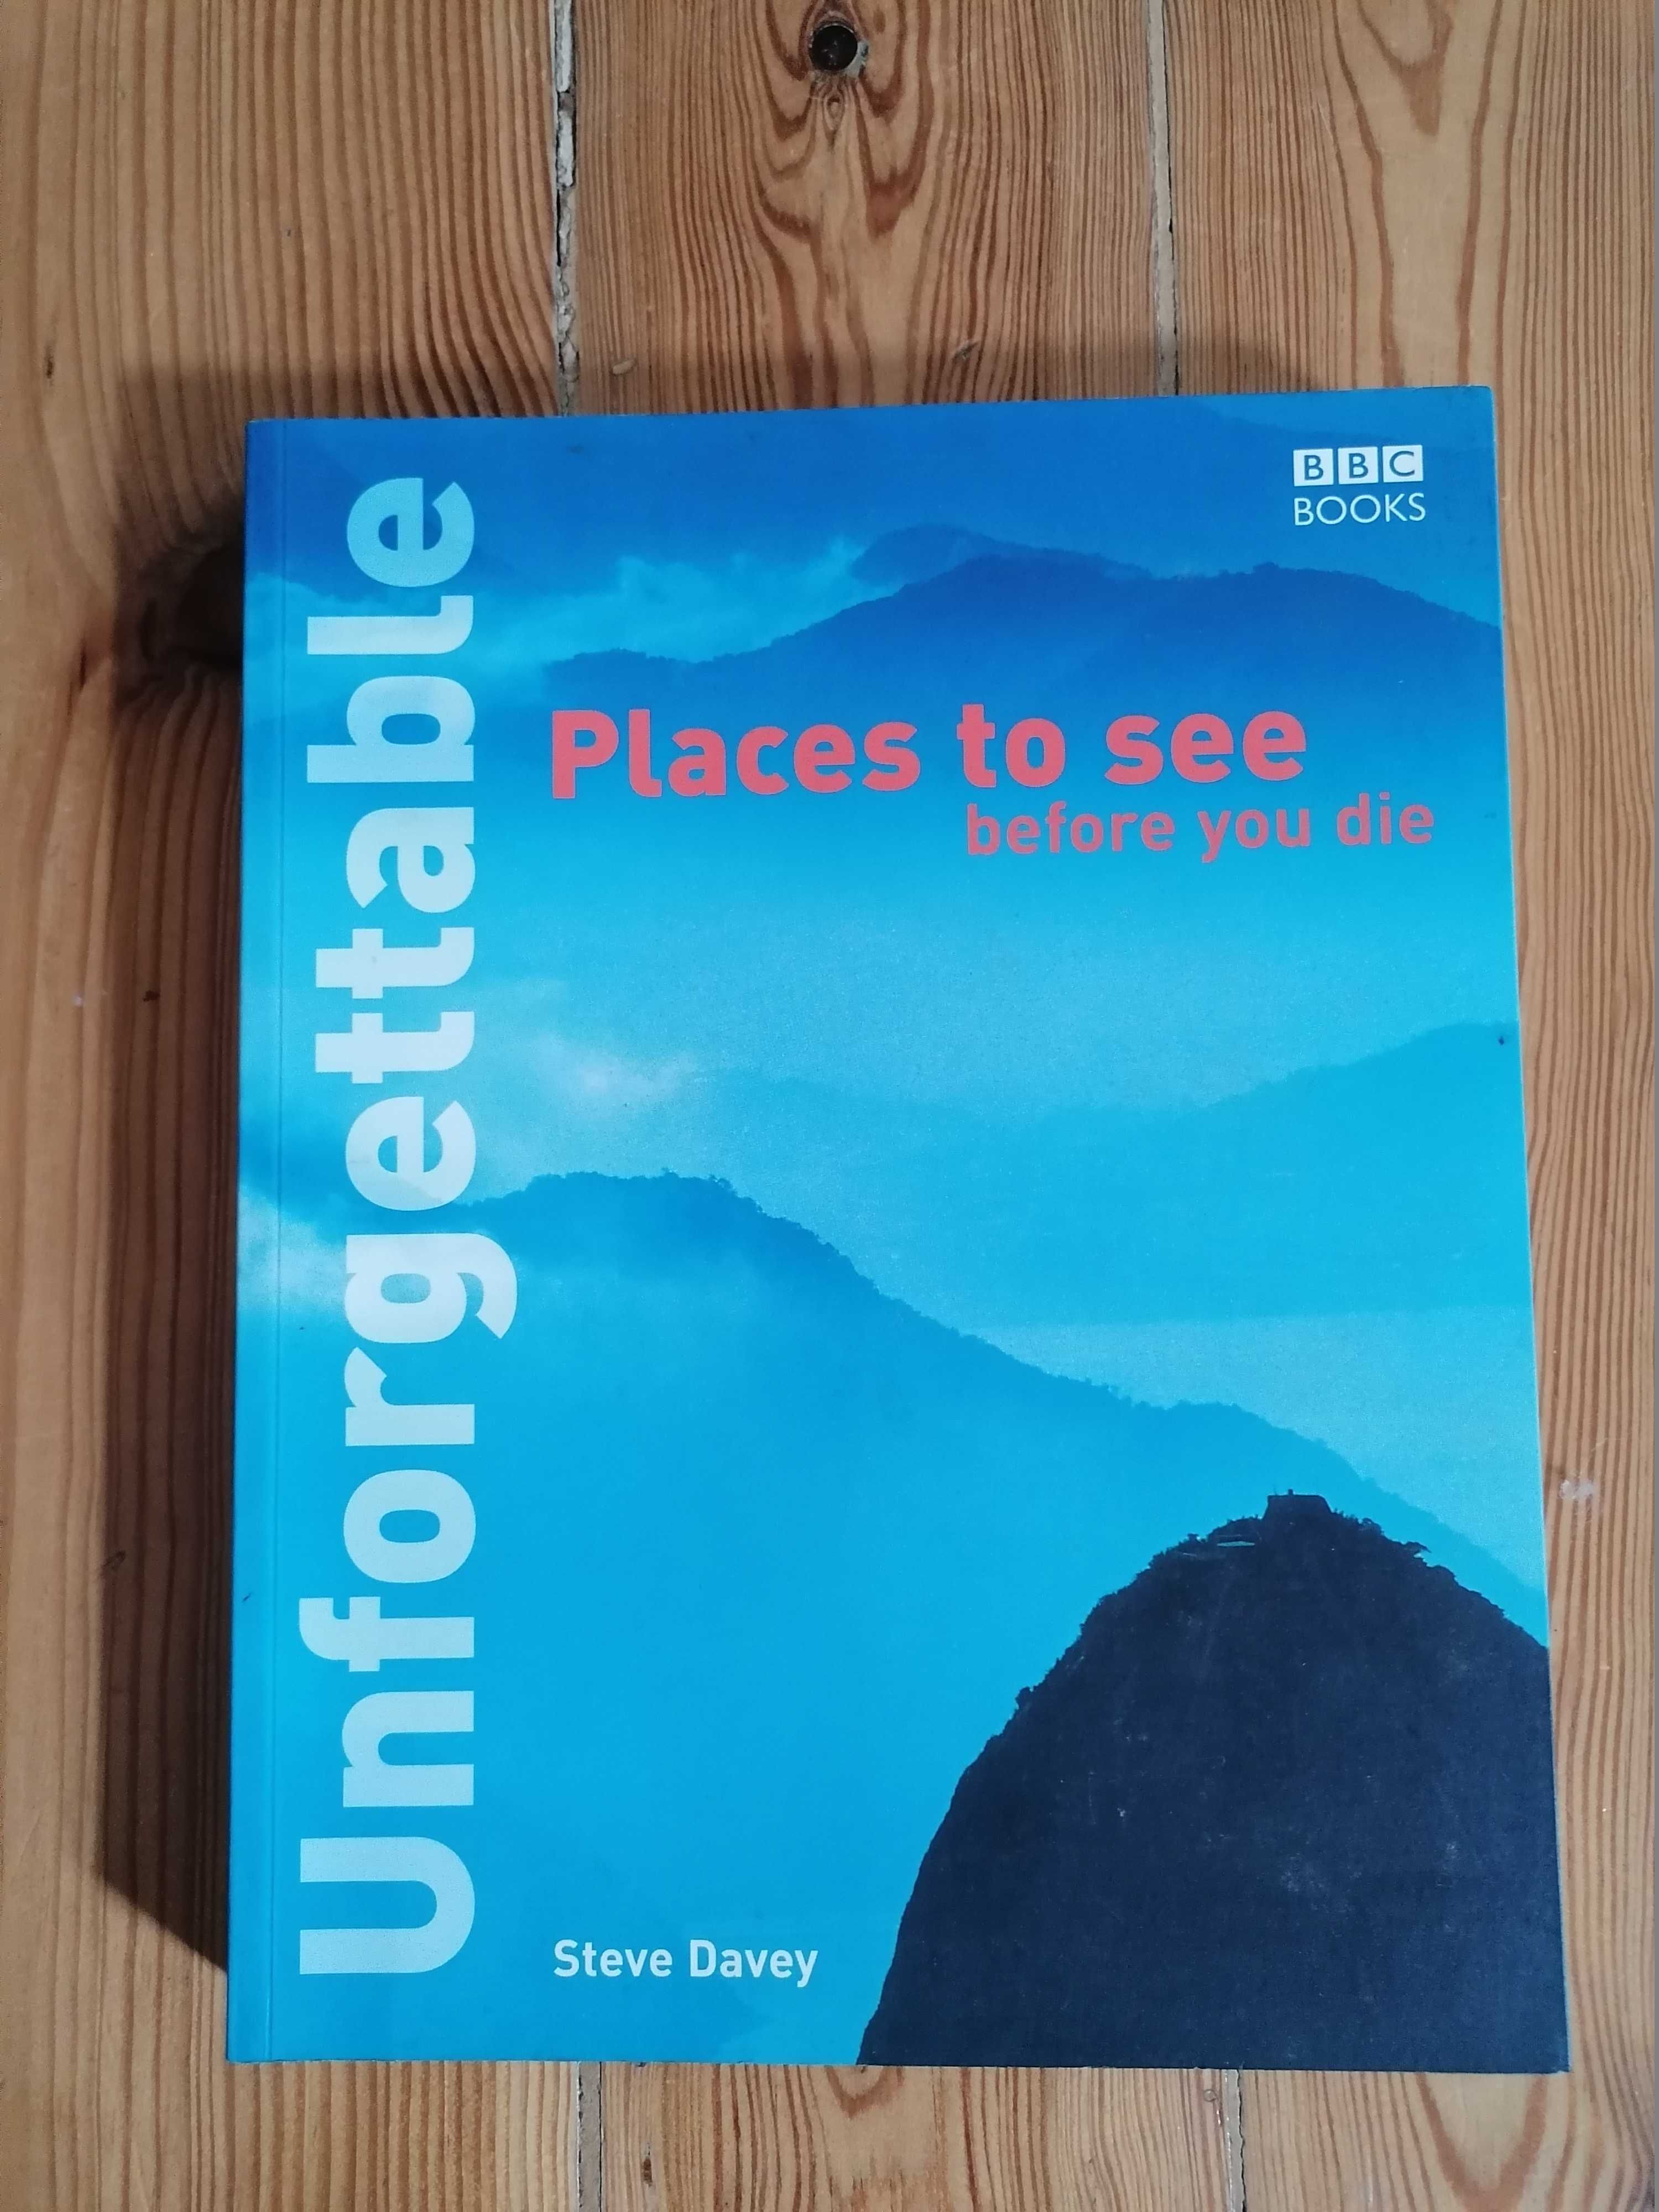 Unforgettable Places to See Before You Die by Steve Davey